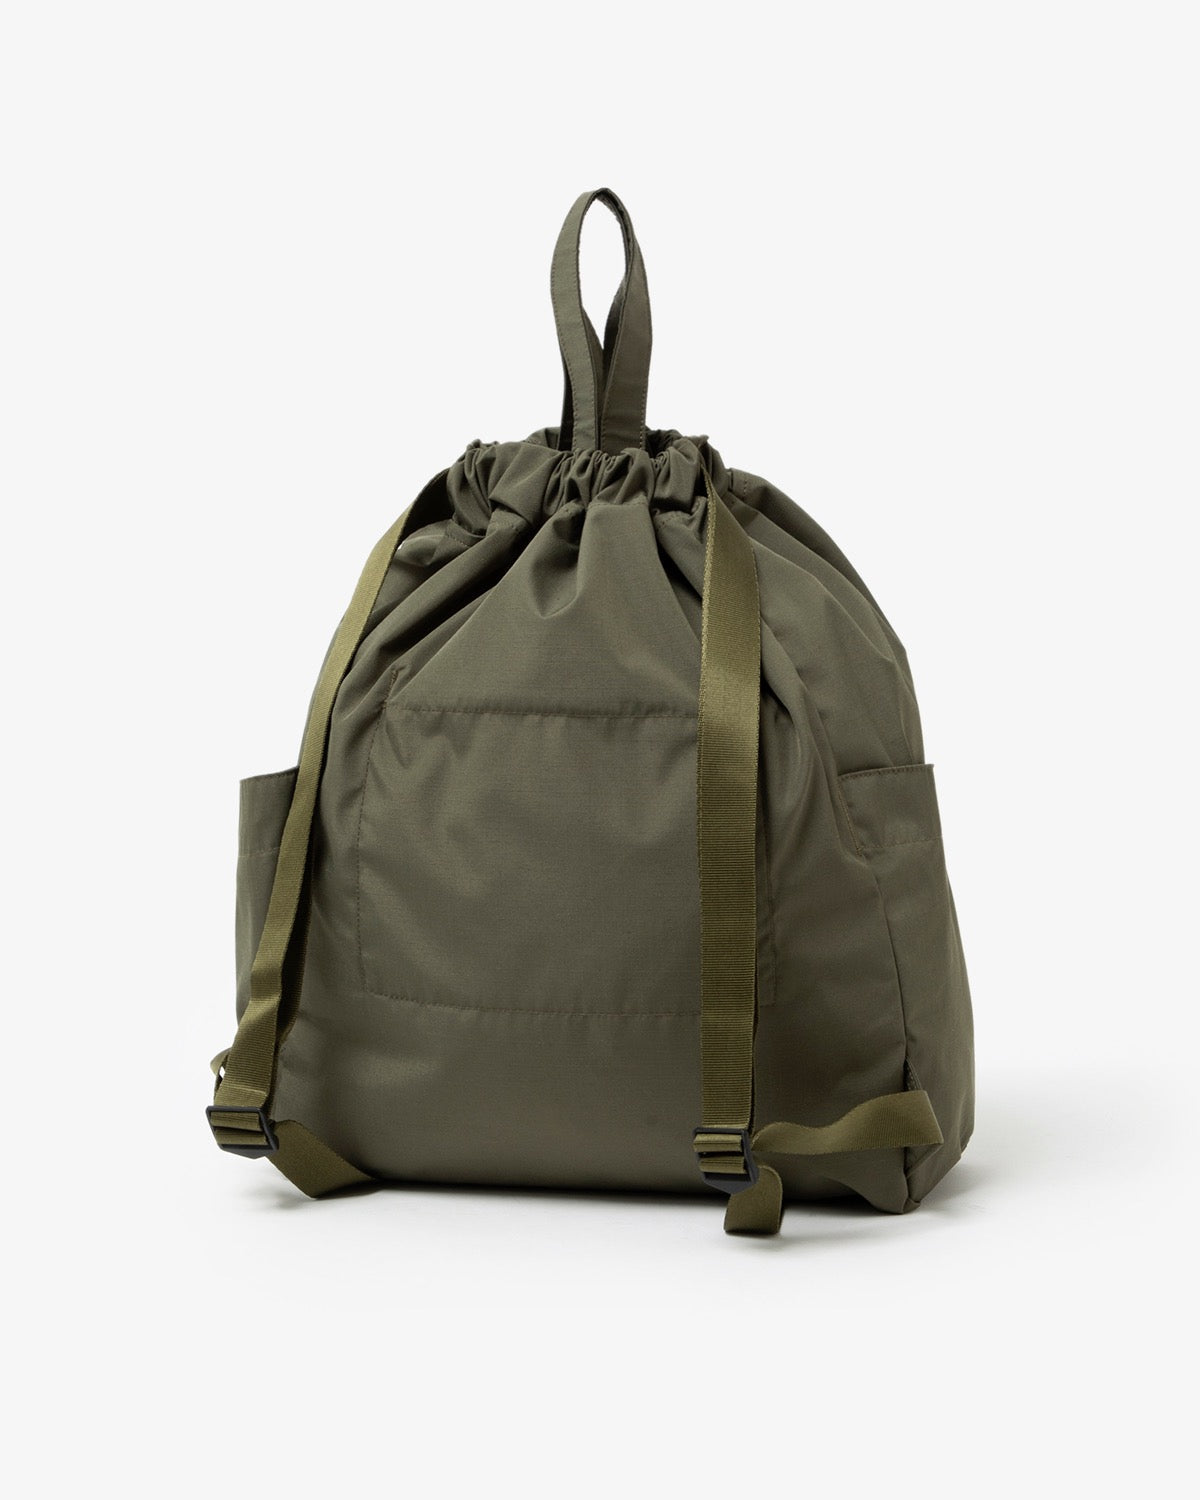 MOUNTAIN WIND DAY PACK